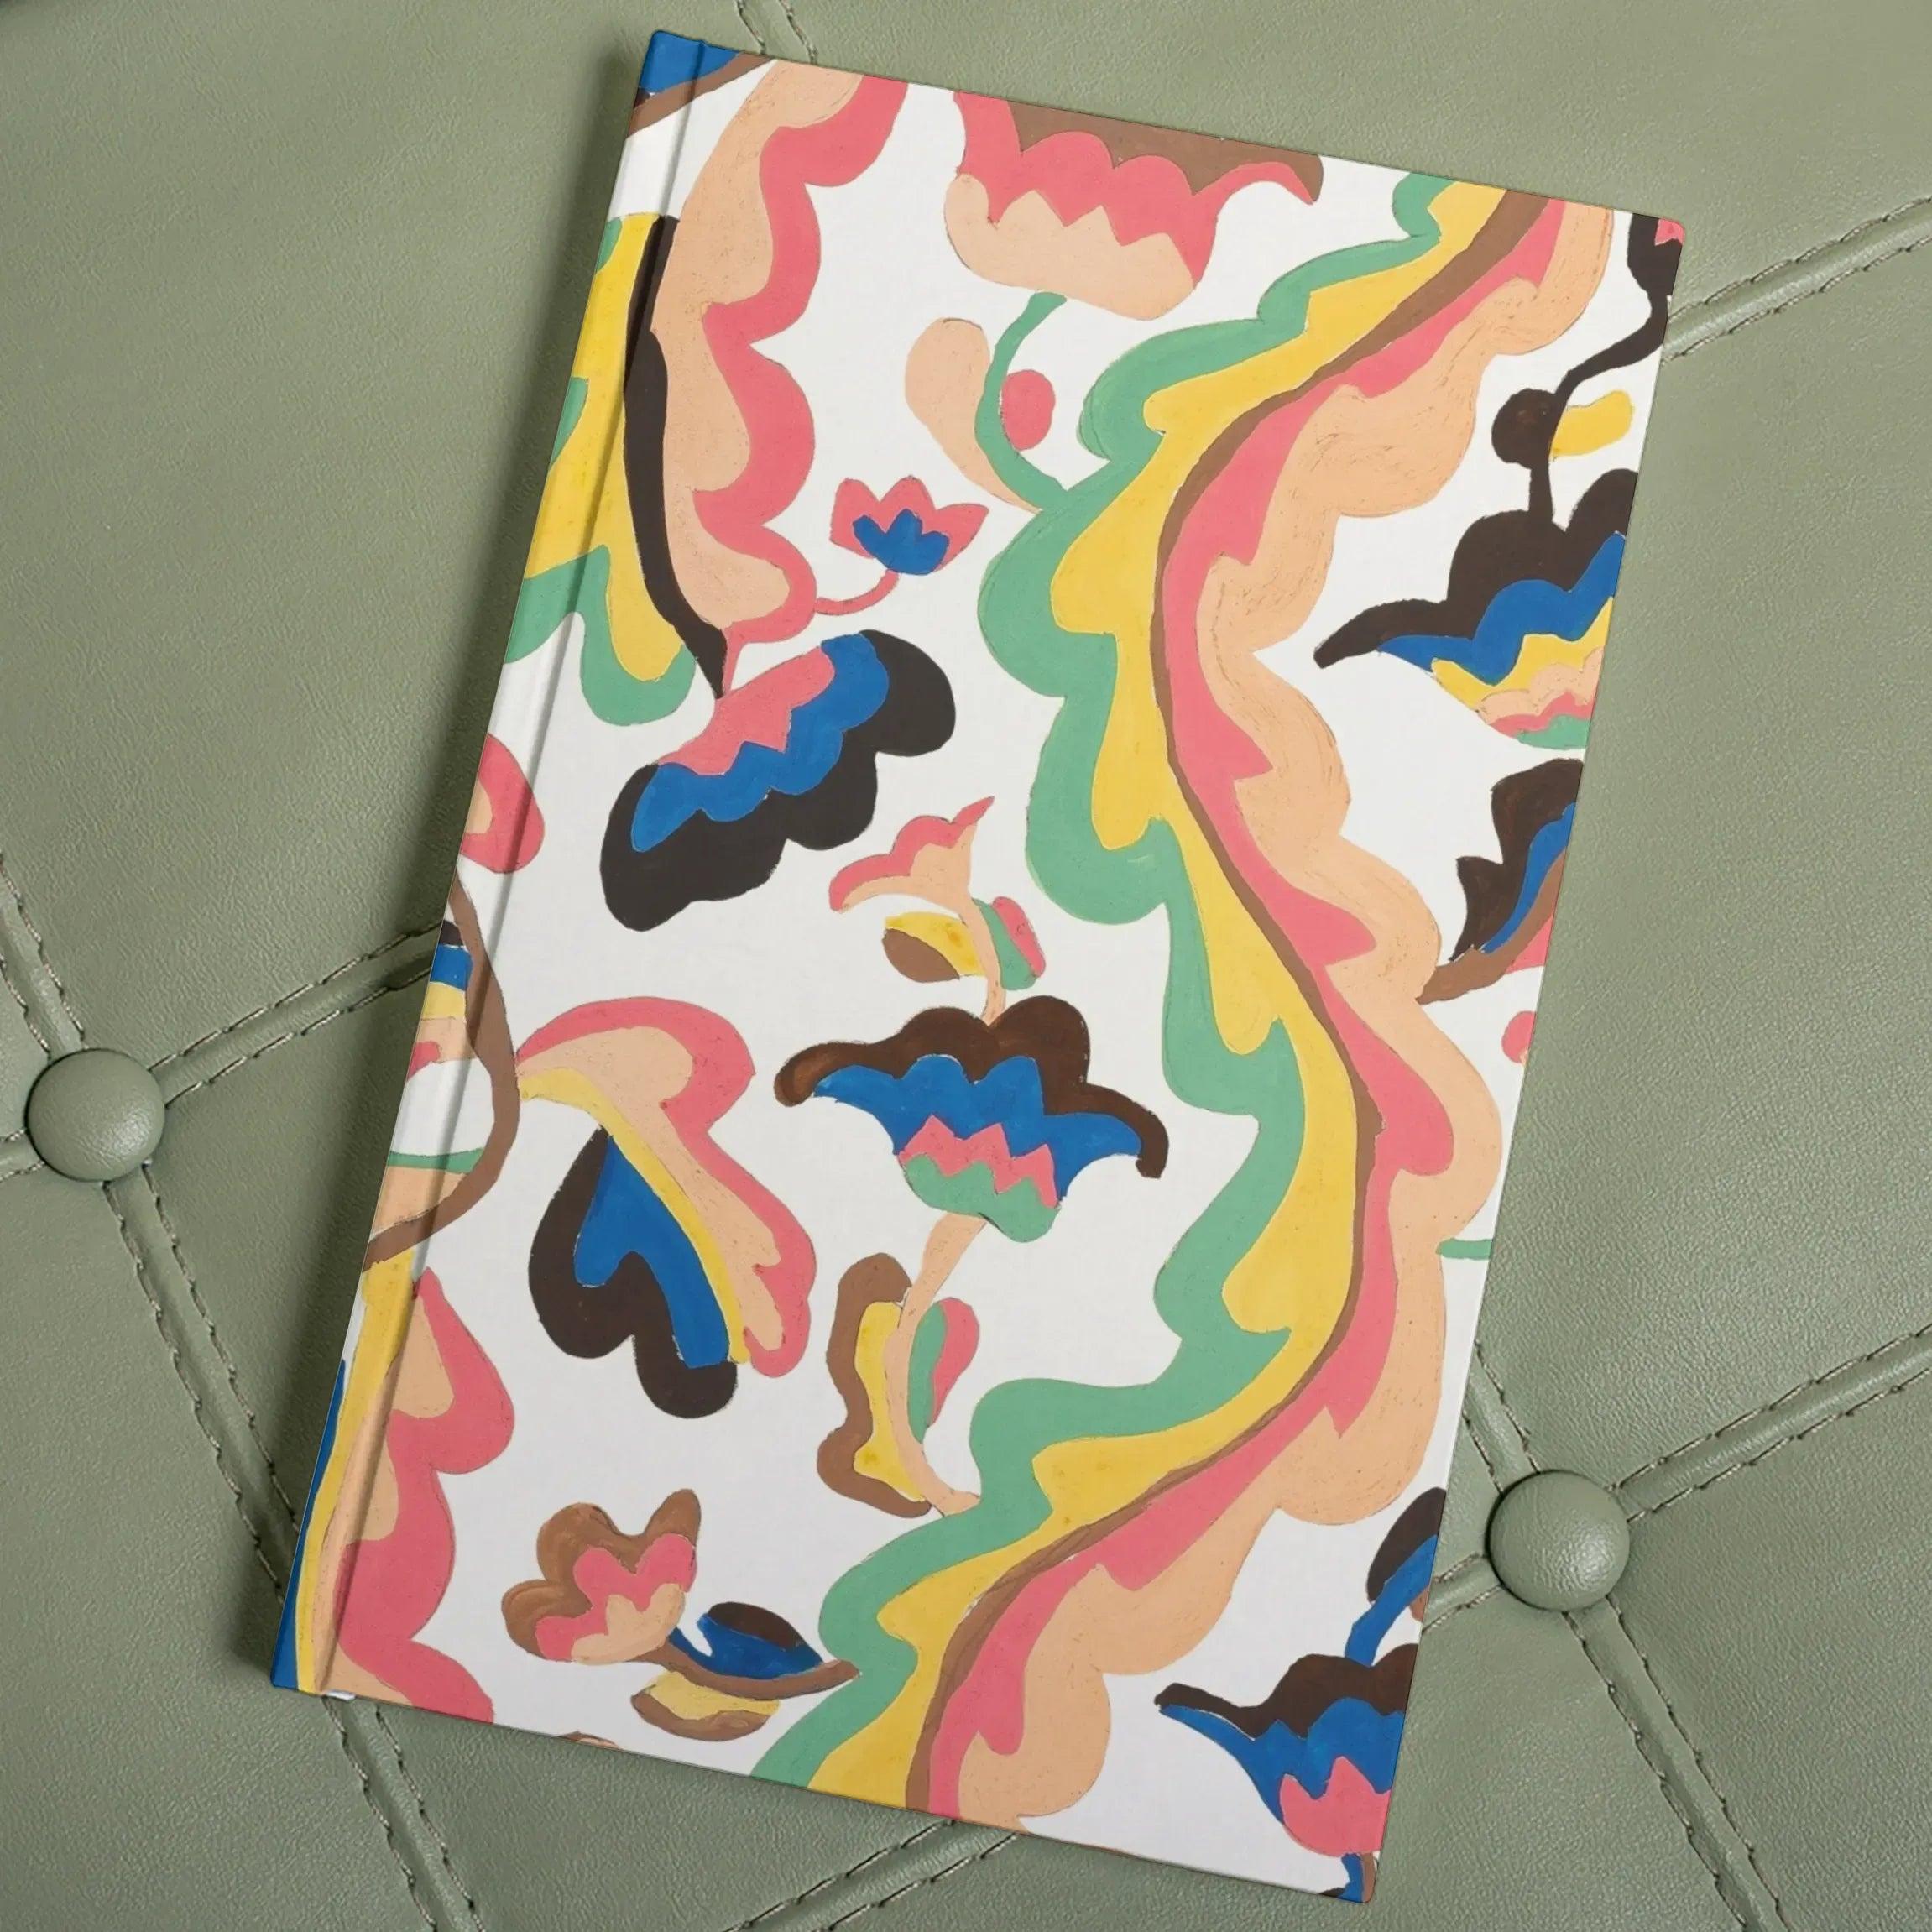 Colcha By Etna Wiswall Hardback Journal - Notebooks & Notepads - Aesthetic Art